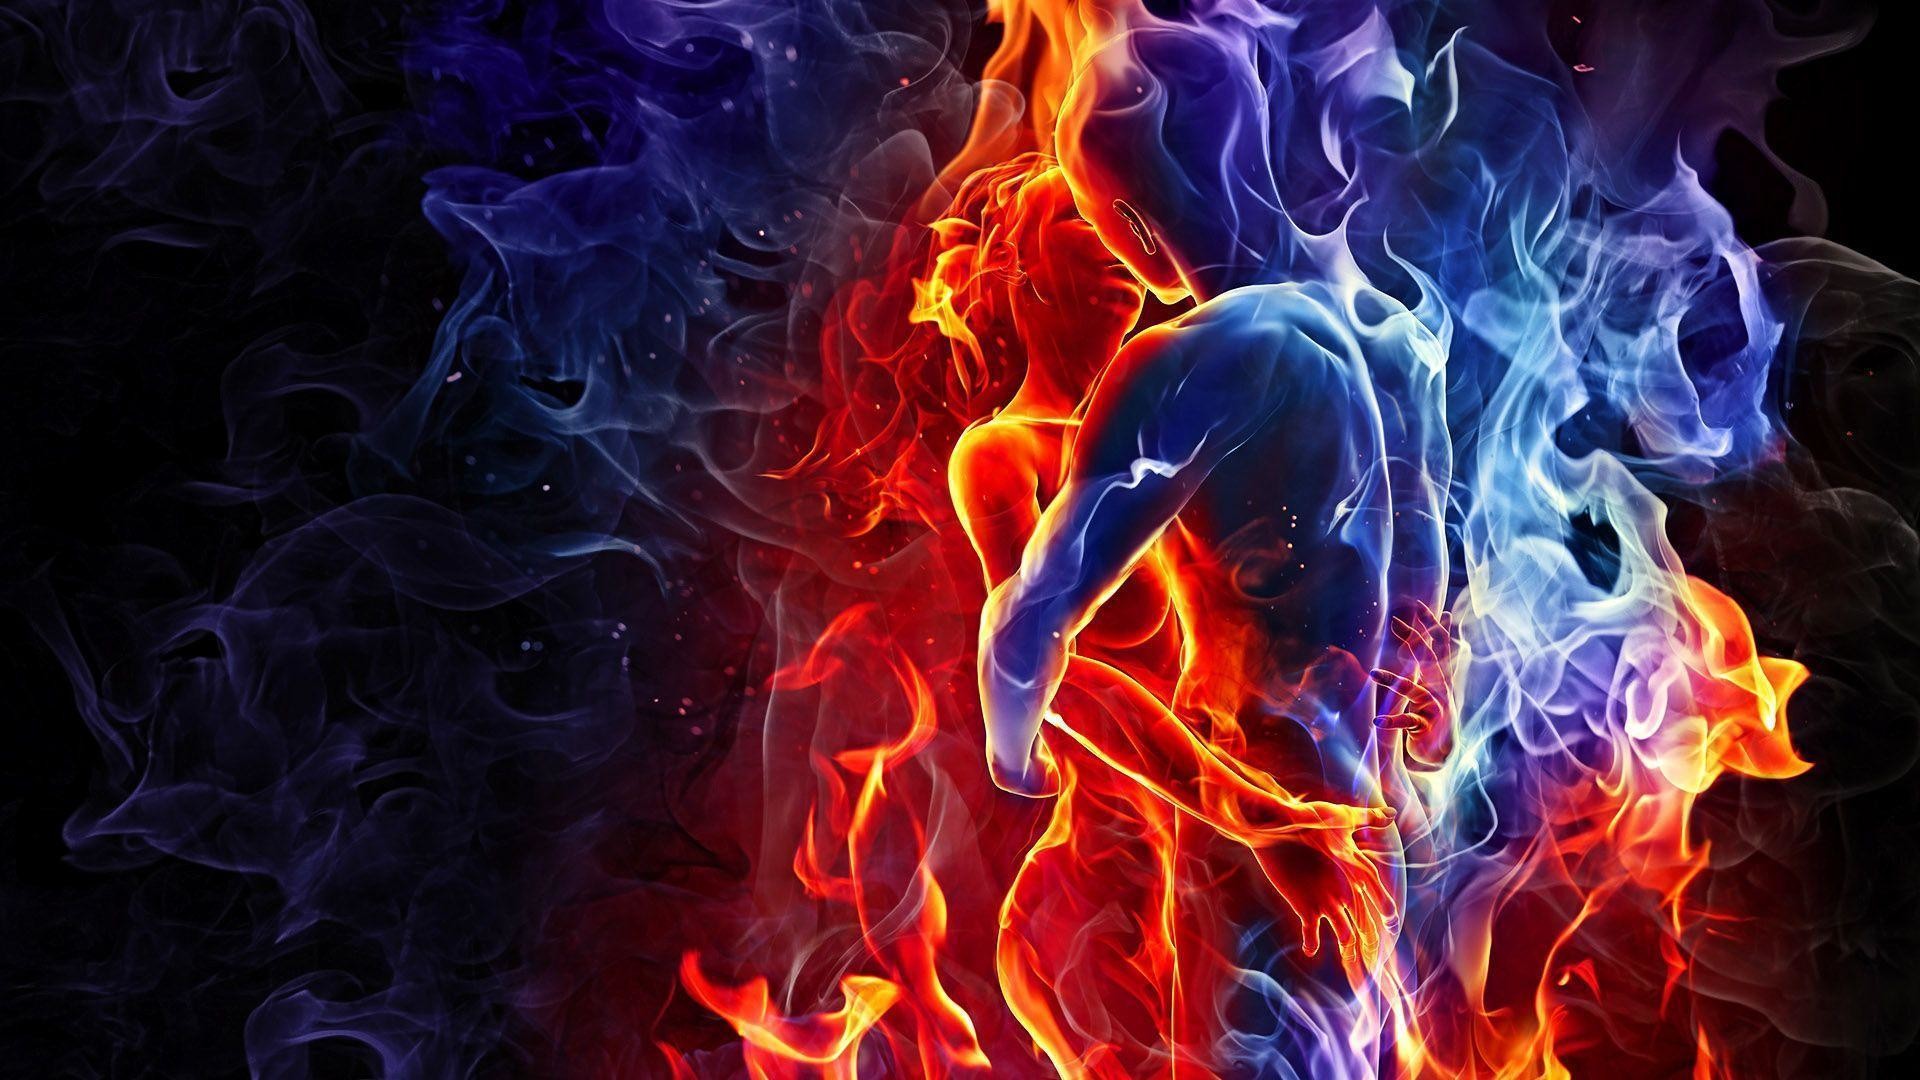 1920x1080 Cool Fire and Ice Wallpapers - WallpaperSafari